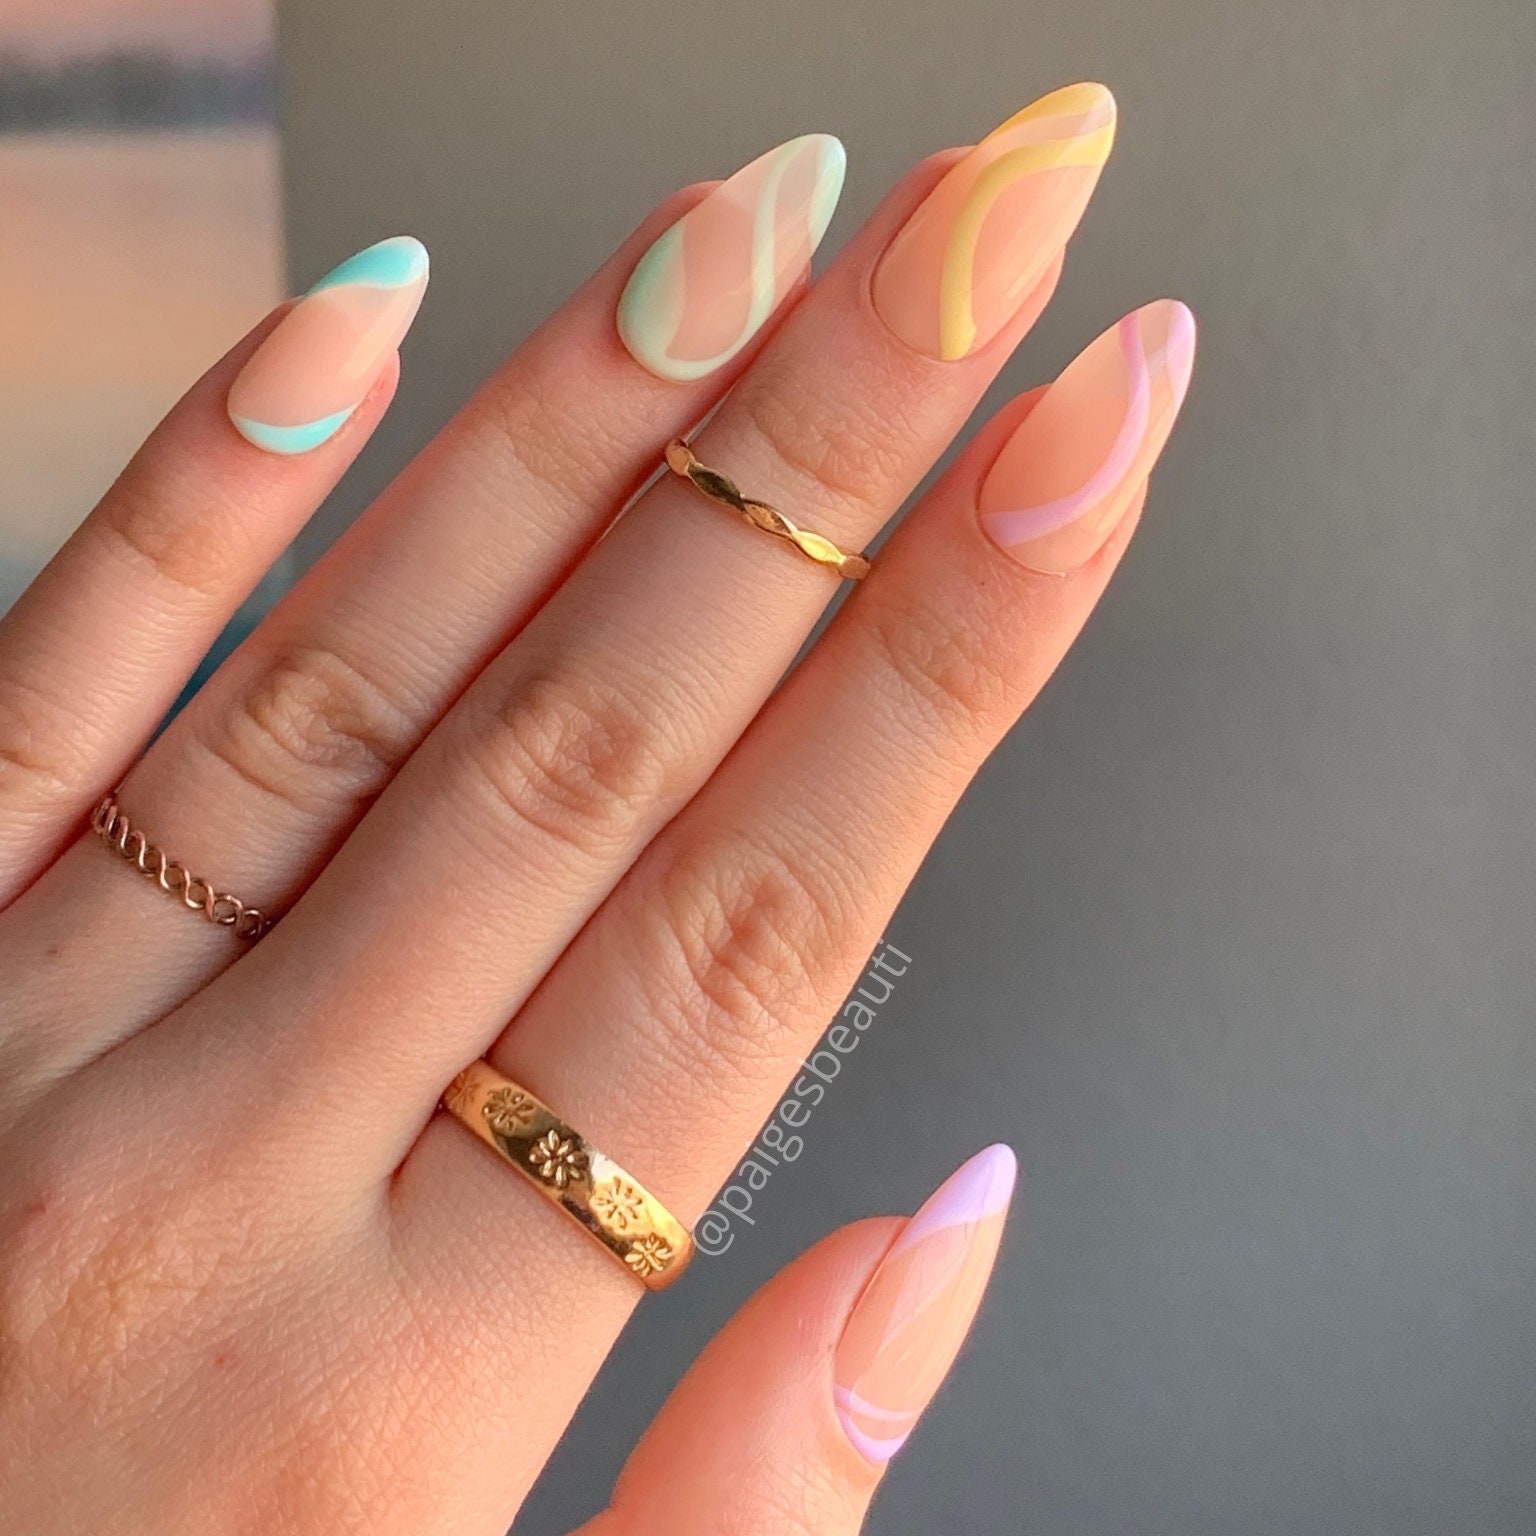 Baby Pastel Striped Nails | midn1ghtbutterfly